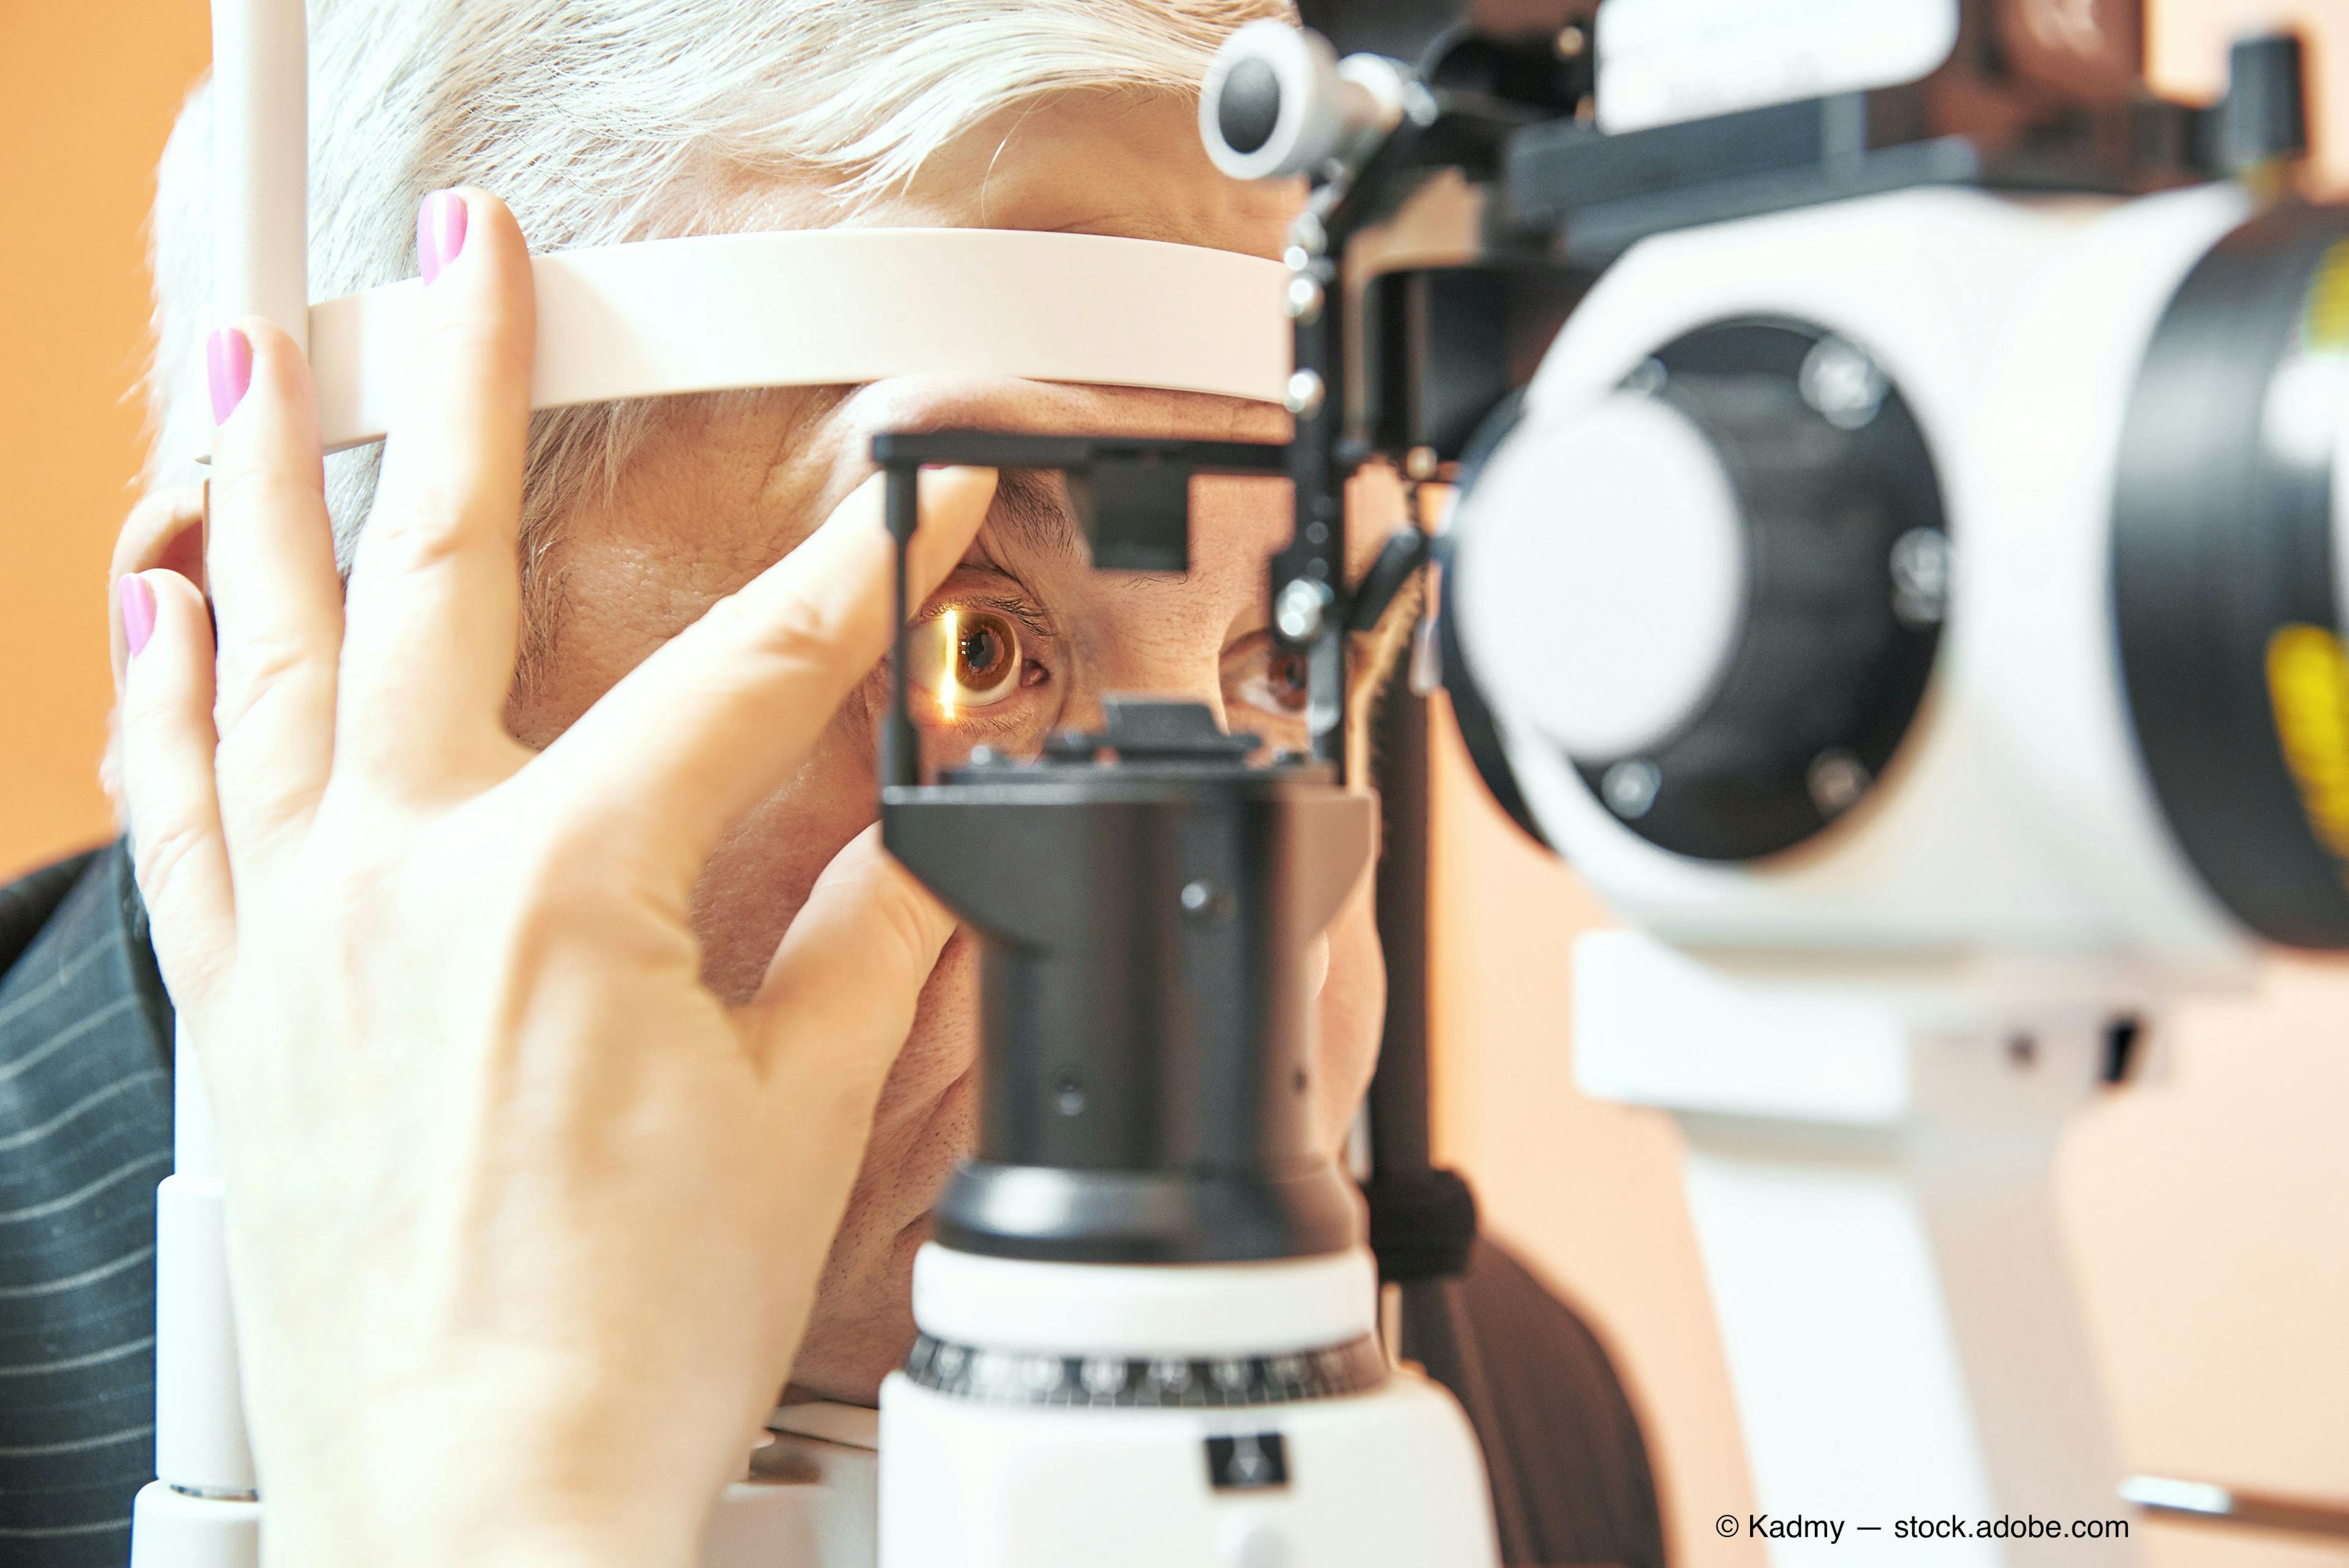 Mont Blanc Phase 3 glaucoma trial for NCX 470 achieves primary objective